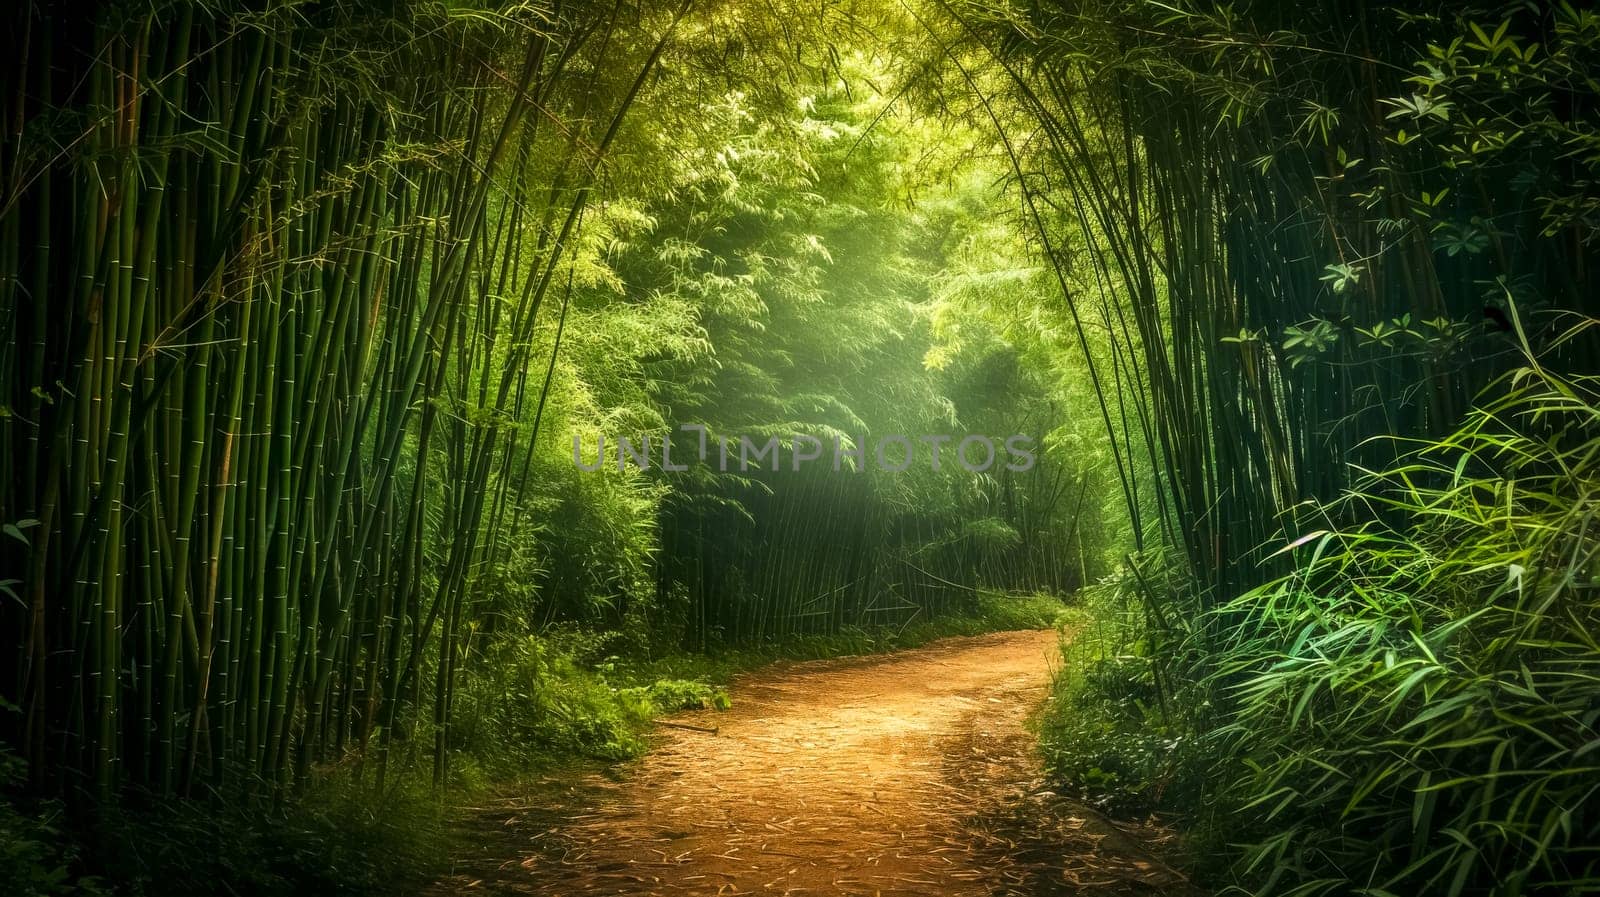 Serene, mystical pathway surrounded by a lush bamboo forest under a soft mist by Edophoto